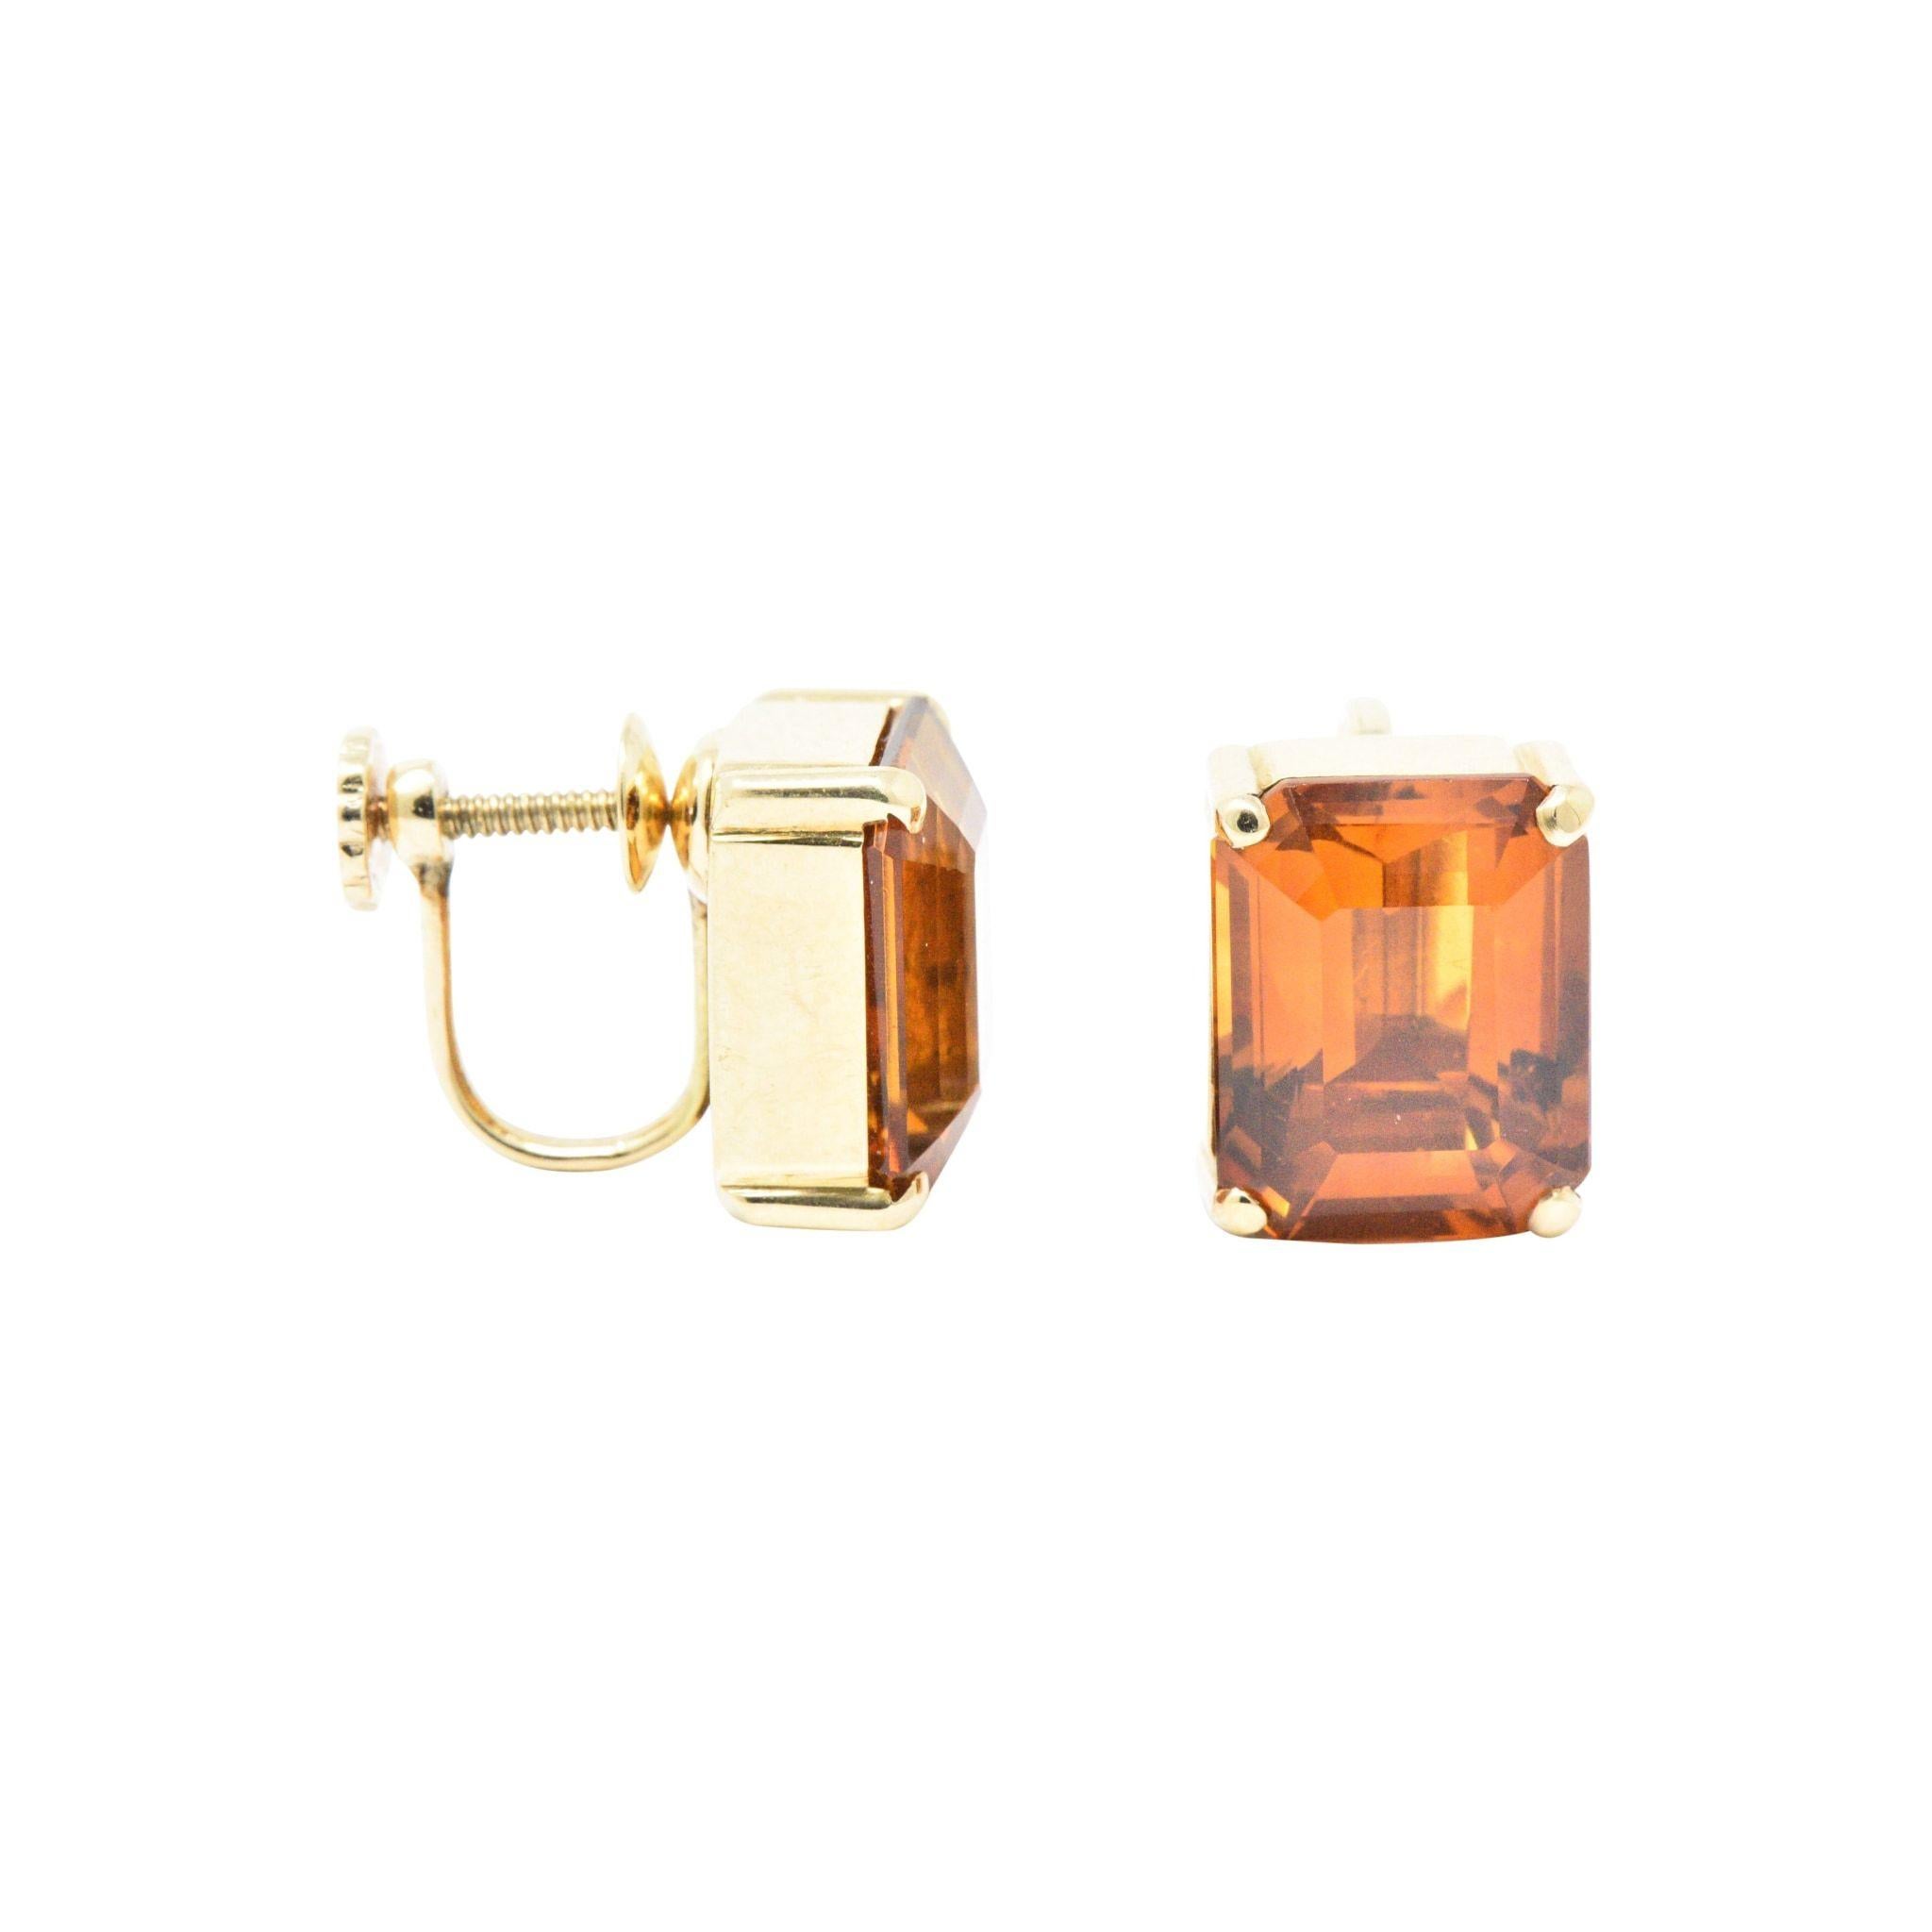 Each centering a rectangular step cut citrine, 12.25 carats total, with a rich orange color, very well matched
In a clean four prong with polished gold bezel mounting
Screw backs
Signed Tiffany & Co. 
Total Weight: 7. Grams
Retro. Tiffany. Clean. 
